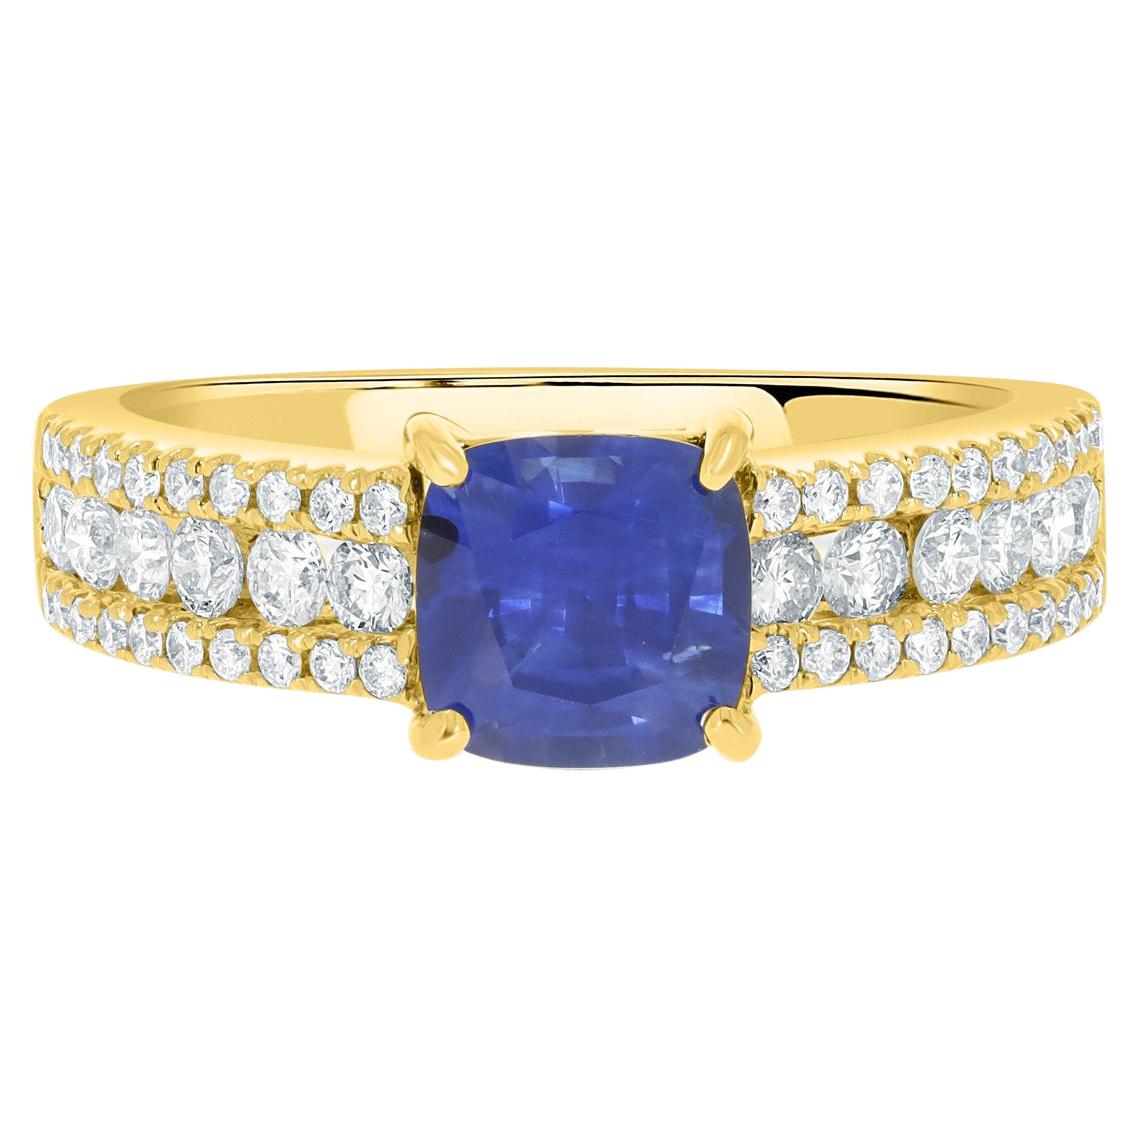 1.56Ct Sapphire Ring with 0.58Tct Diamonds Set in 14K Yellow Gold